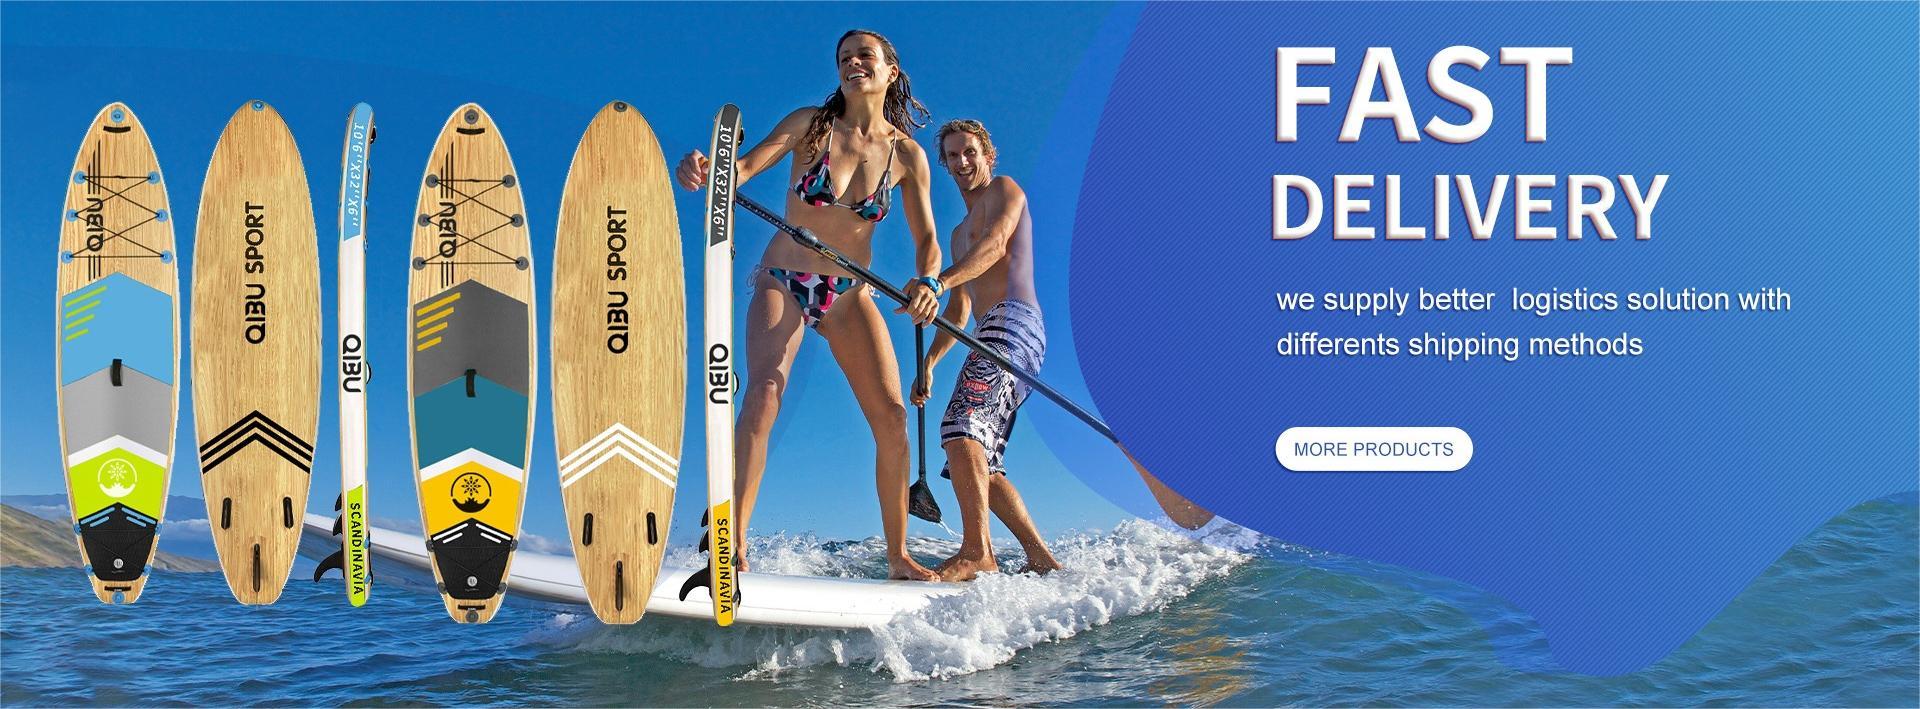 Paddle board supplier